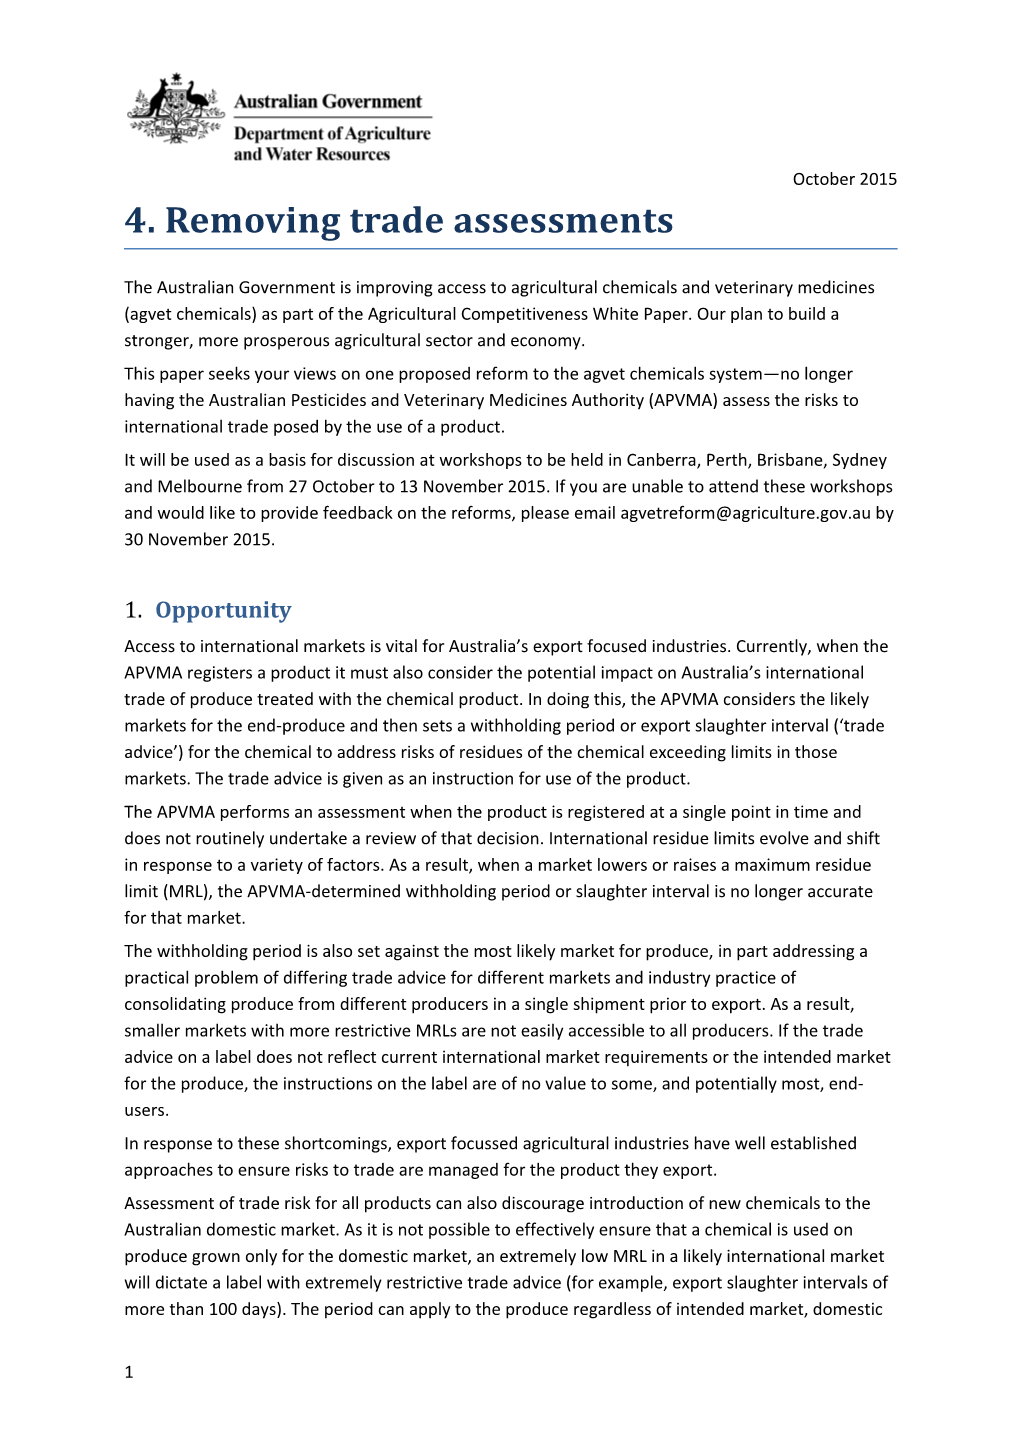 4. Removing Trade Assessments